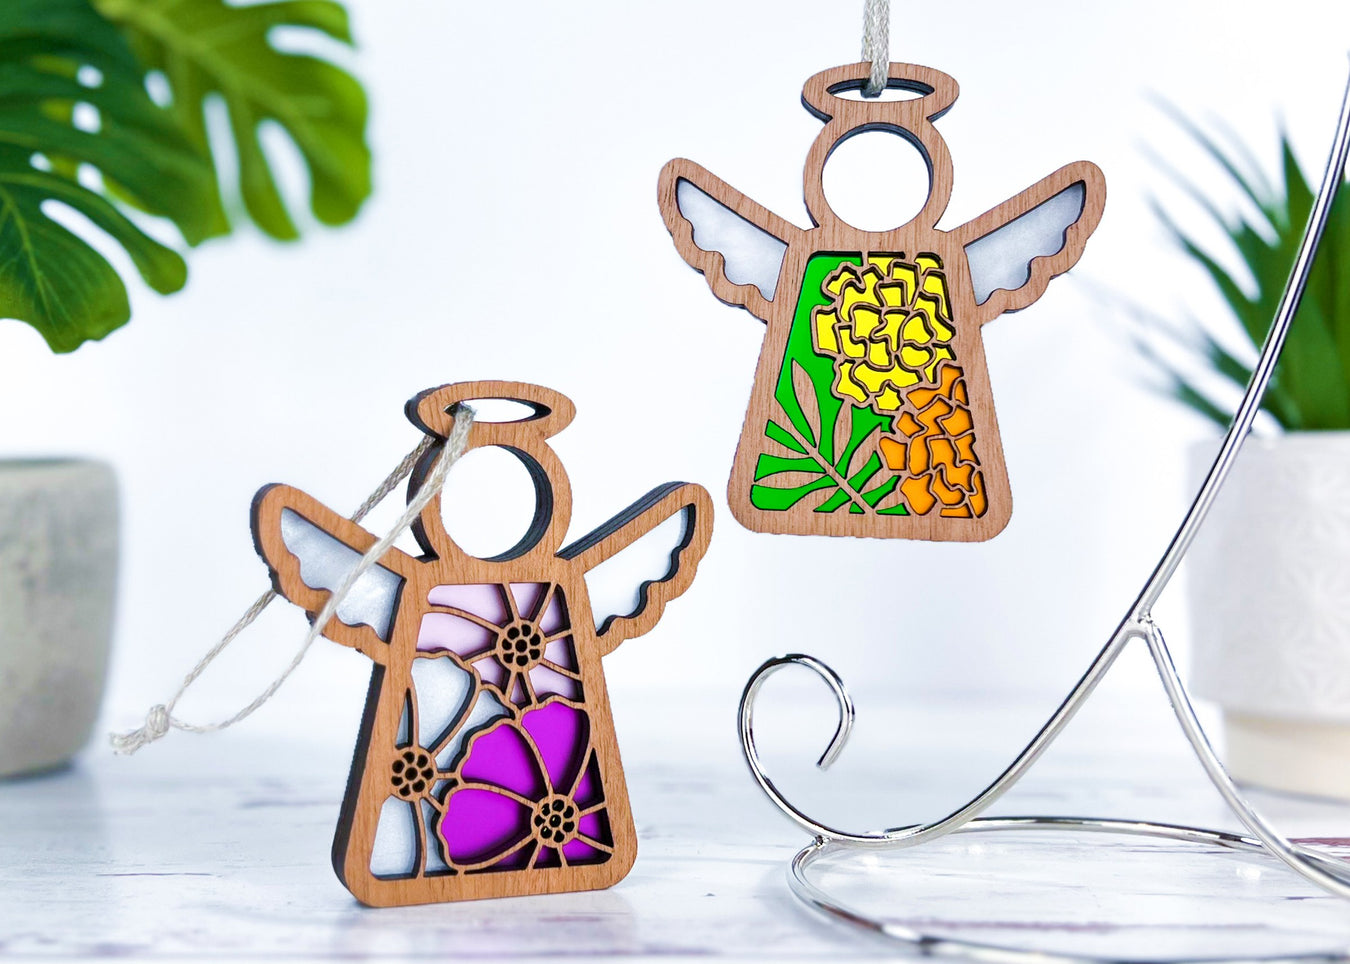 Angel ornaments featuring October birth month flowers, ideal birthday gift ideas for a wife, best friend or special women, showcasing vibrant cosmos and marigold birth flowers in a stained glass inspired style.